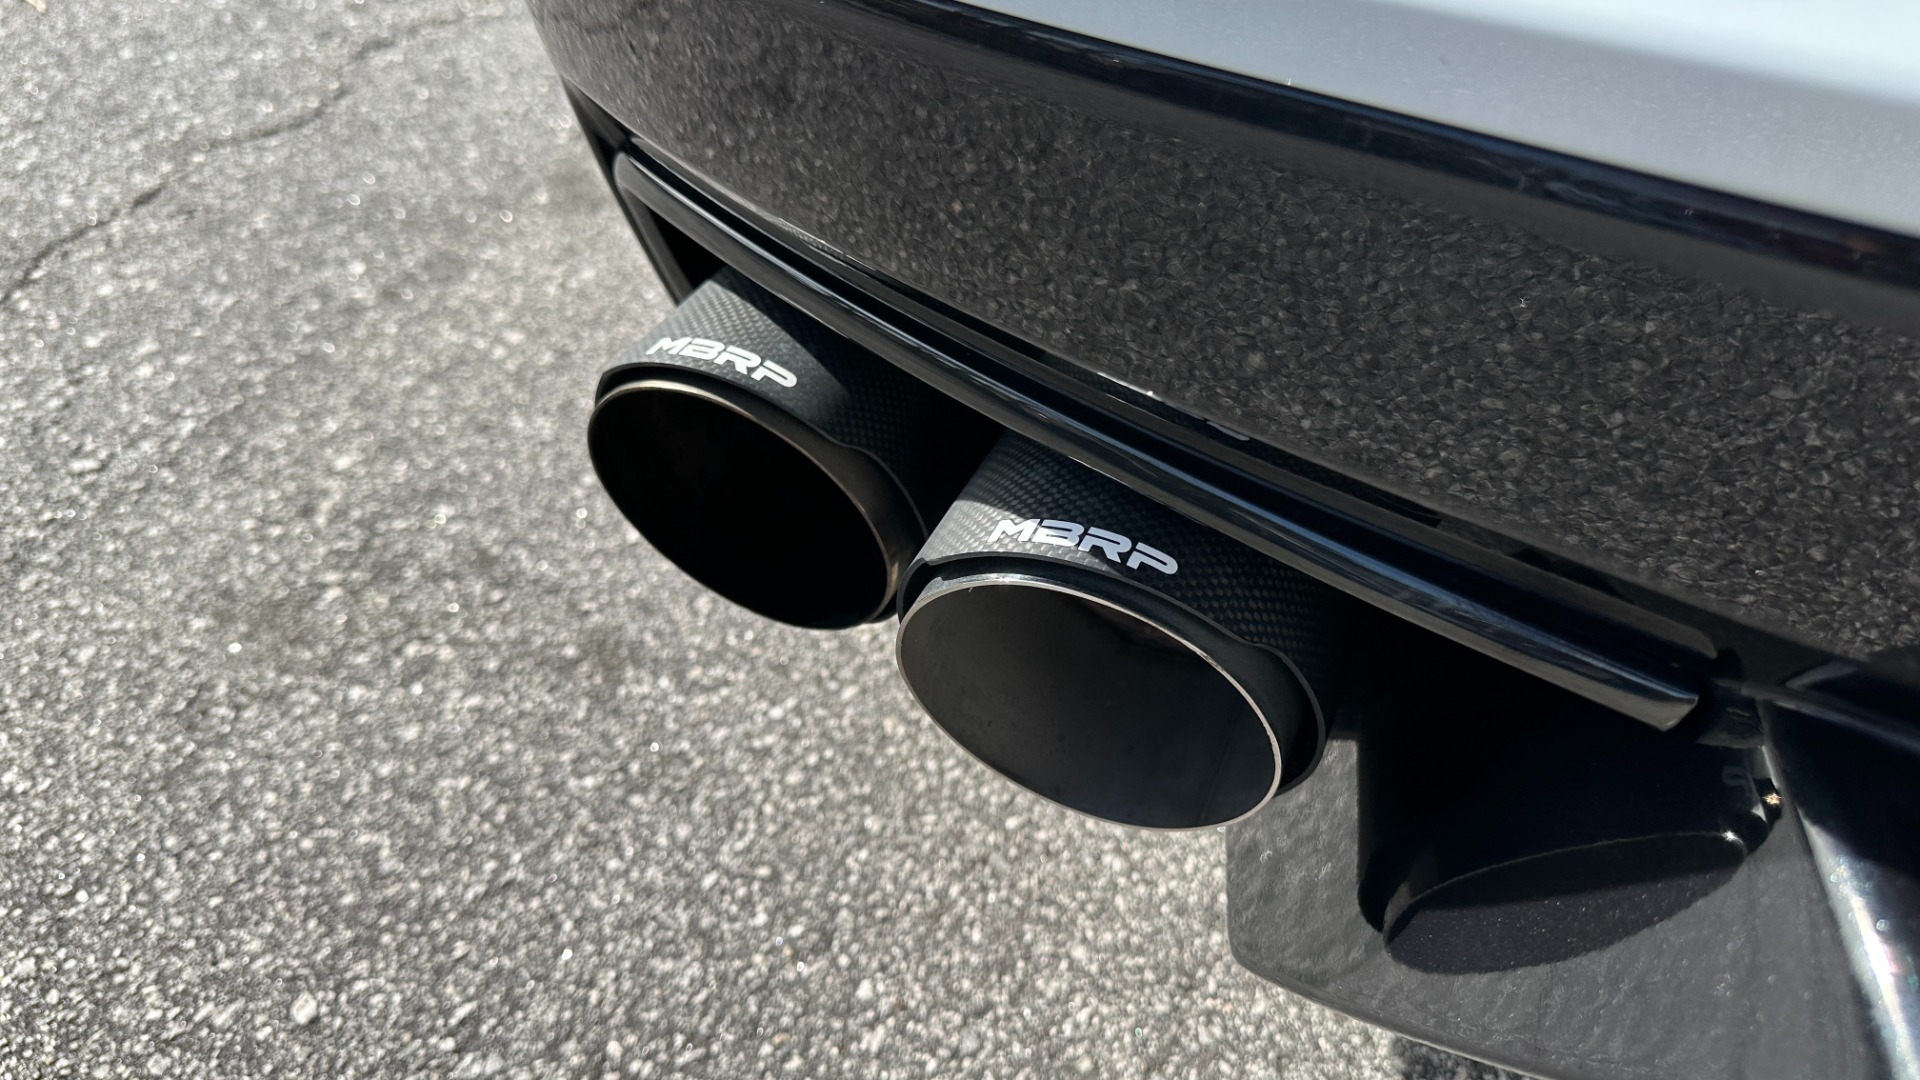 Used 2022 Chevrolet Corvette 1LT / COUPE / MBRP EXHAUST / CARBON FIBER EXHAUST TIPS / HARD TOP for sale $86,995 at Formula Imports in Charlotte NC 28227 30